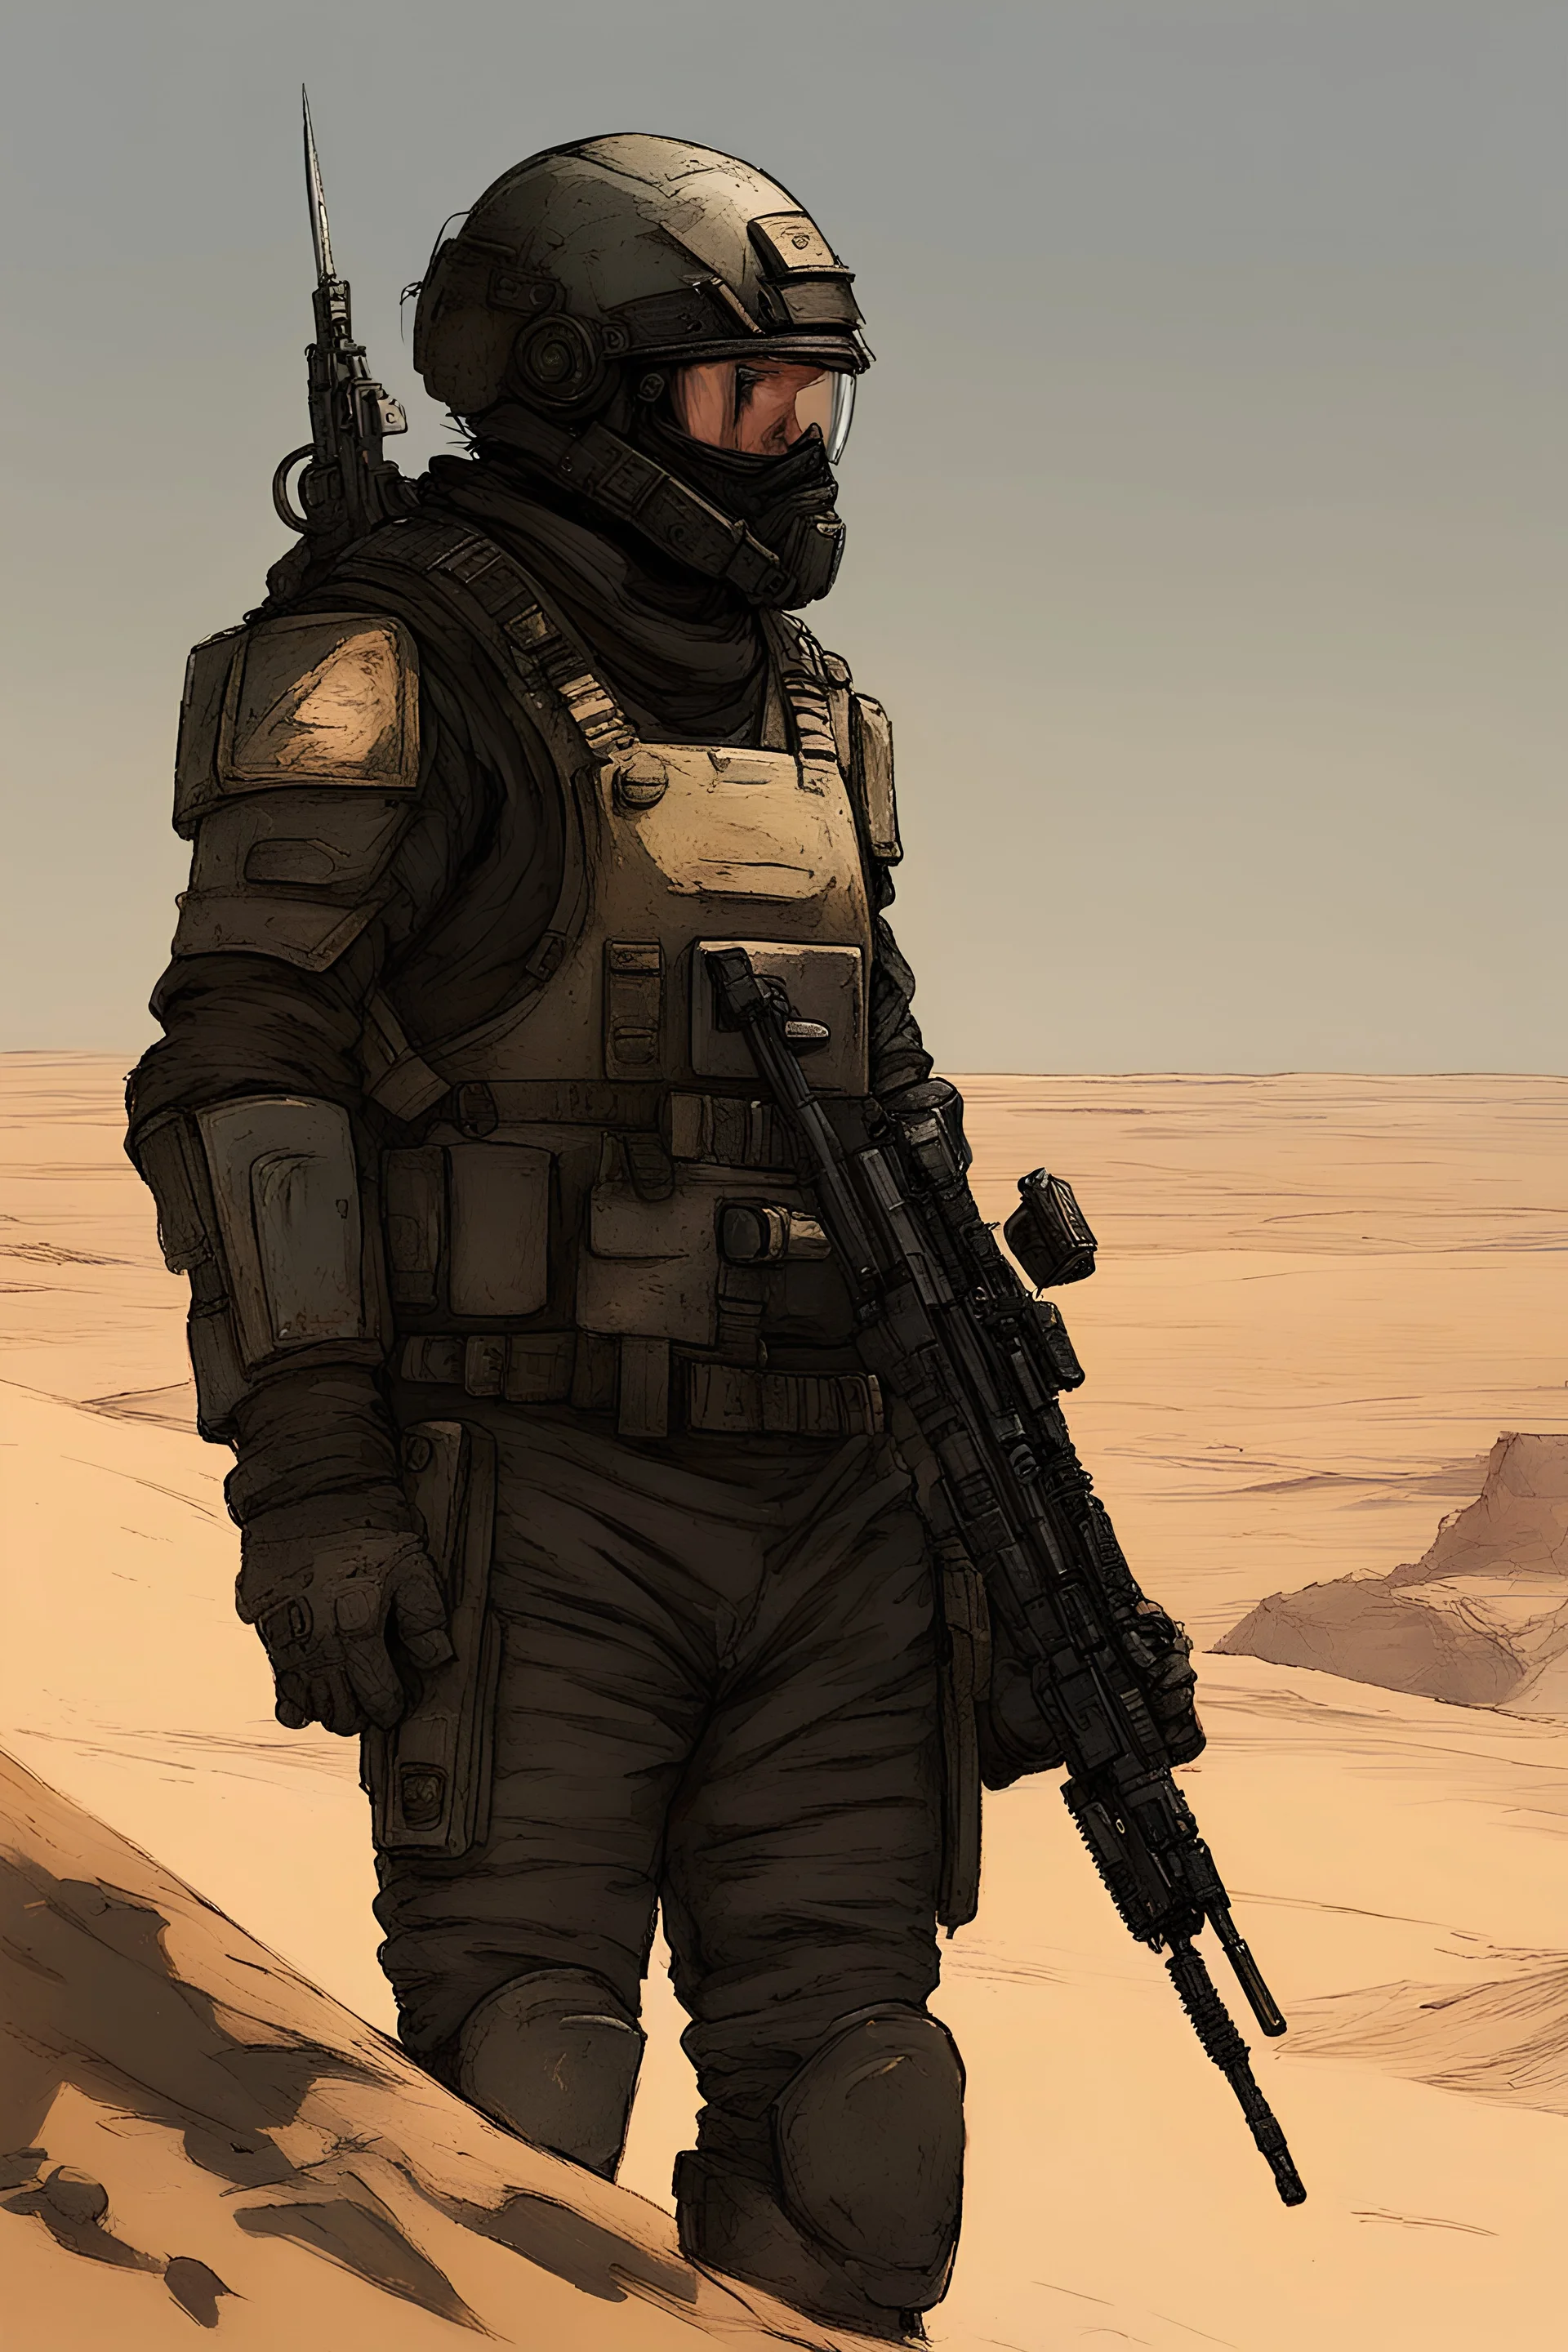 A rugged mArine with a short thick black beard wearing a UNSC Marine style armour looking out upon a desert planet, Black armor with no weapons. art style Alex Maleev